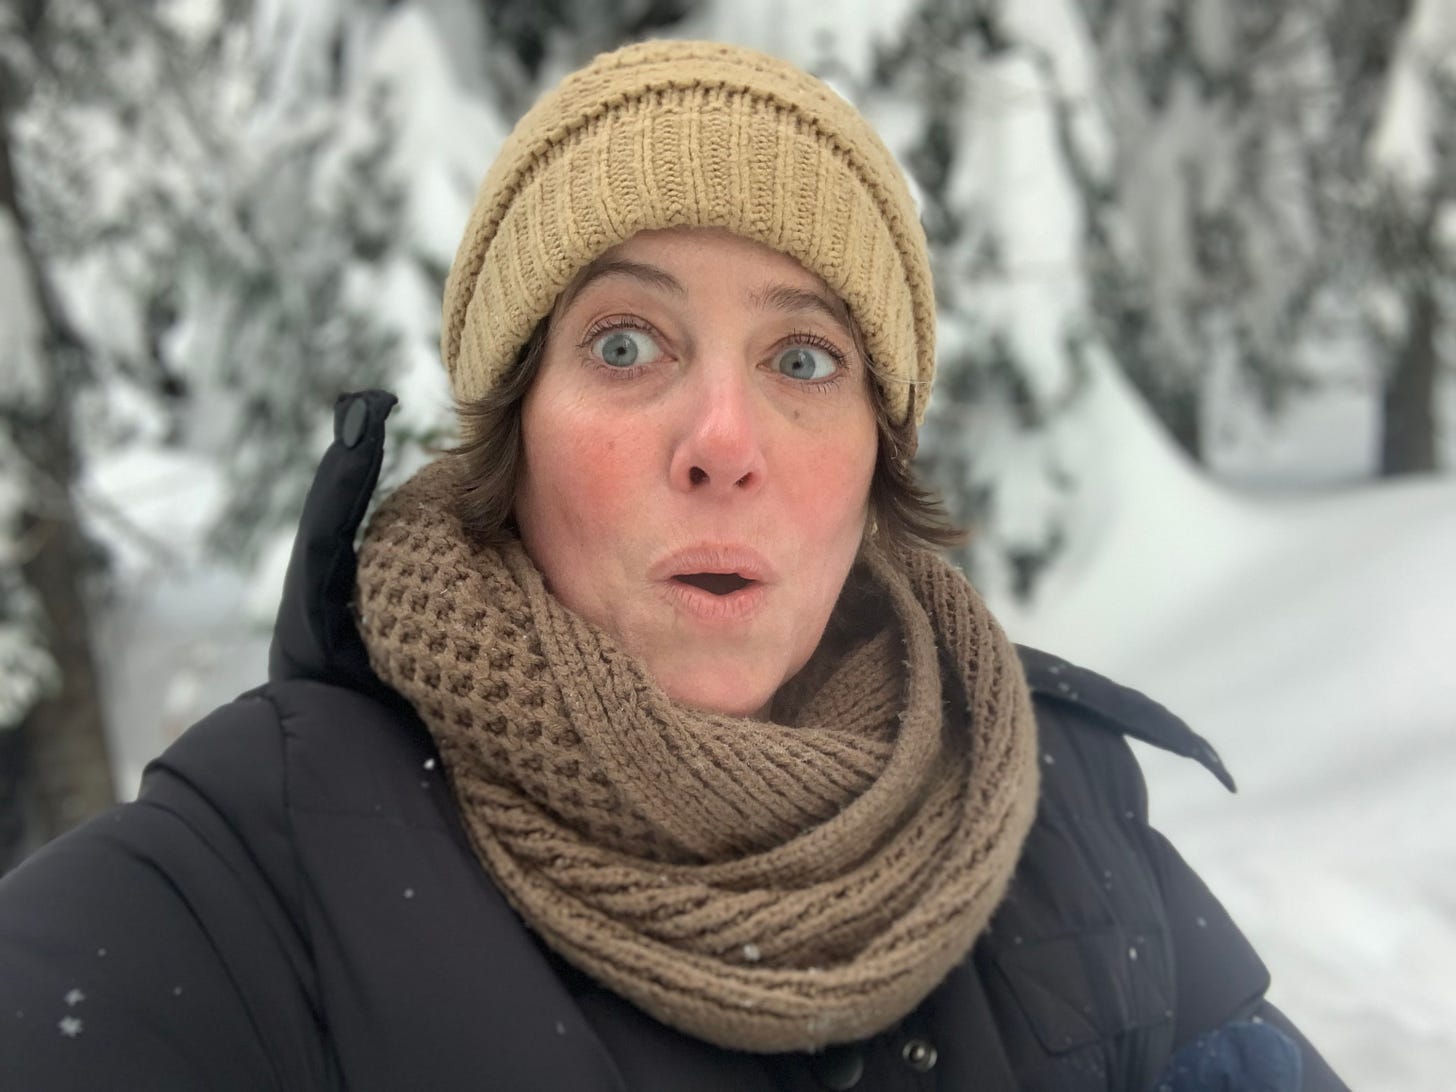 Author Holly Starley, her eyes playfully wide, stands in a snow-covered field of pine trees.